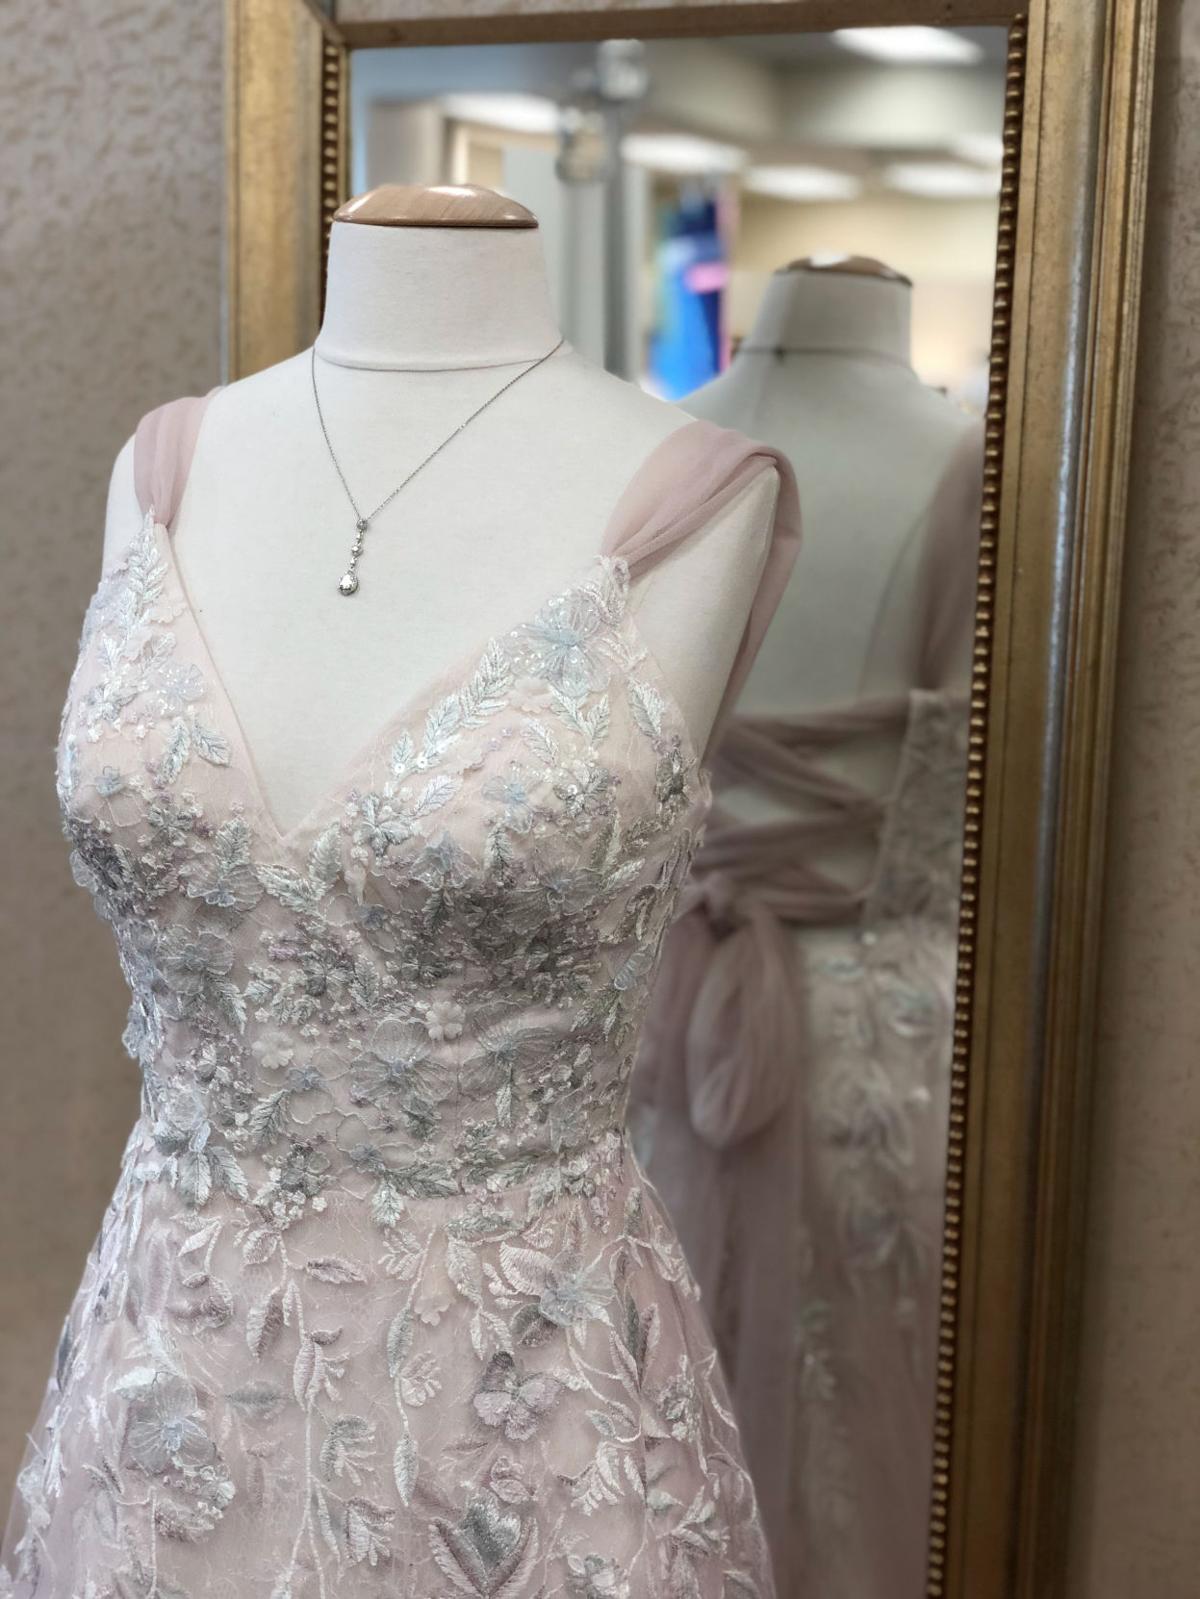 Brides see new dress code for weddings WEDDING ESSENTIALS Bridal University When: 10 a.m. to 2 p.m. Sunday Where: Mid-America Center, 1 Arena Way, Council Bluffs Cost: $10 in advance, $14 at the door Information: omaha.com/weddingessentials